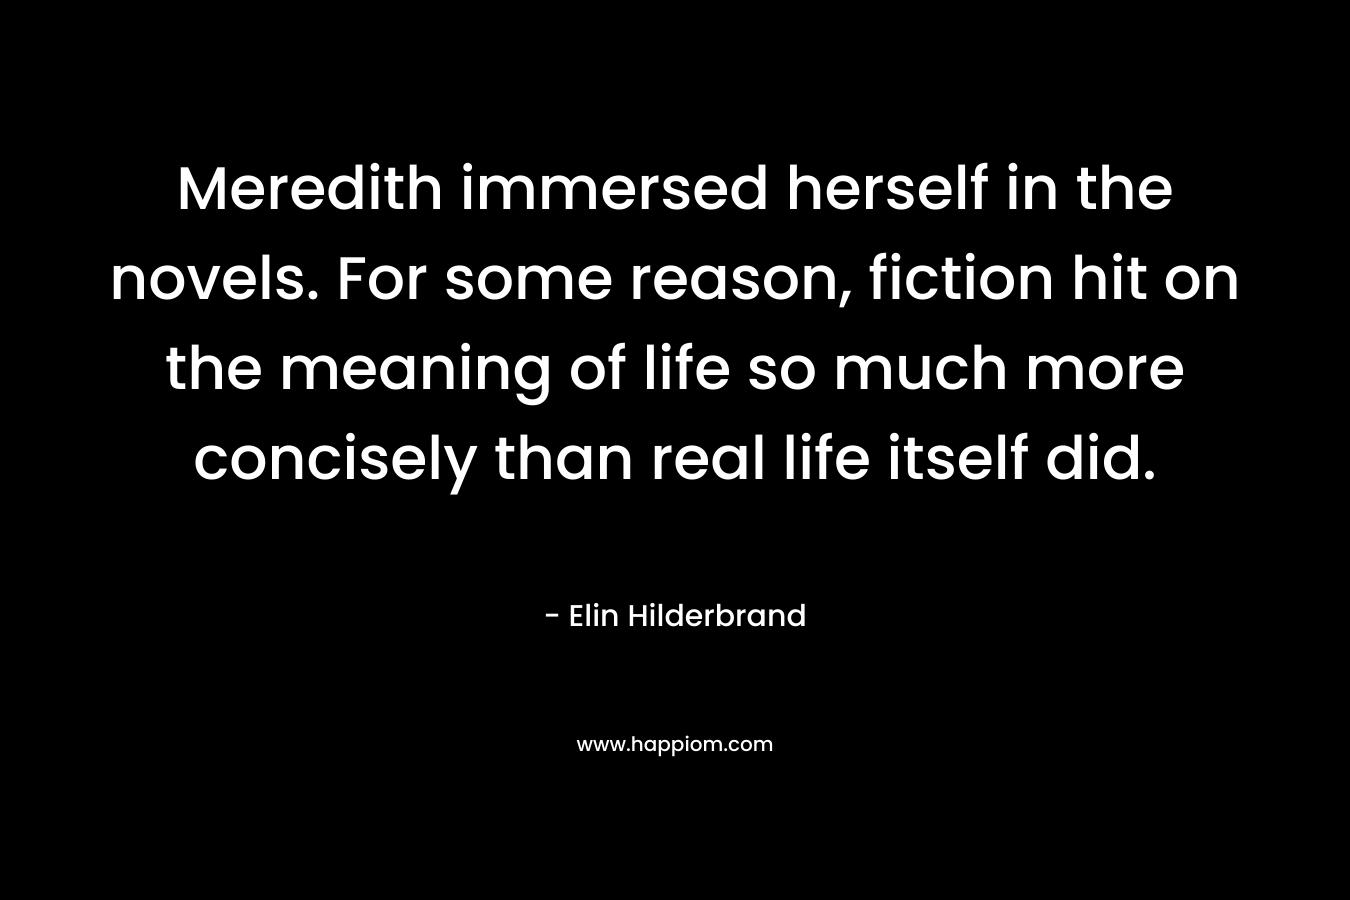 Meredith immersed herself in the novels. For some reason, fiction hit on the meaning of life so much more concisely than real life itself did. – Elin Hilderbrand